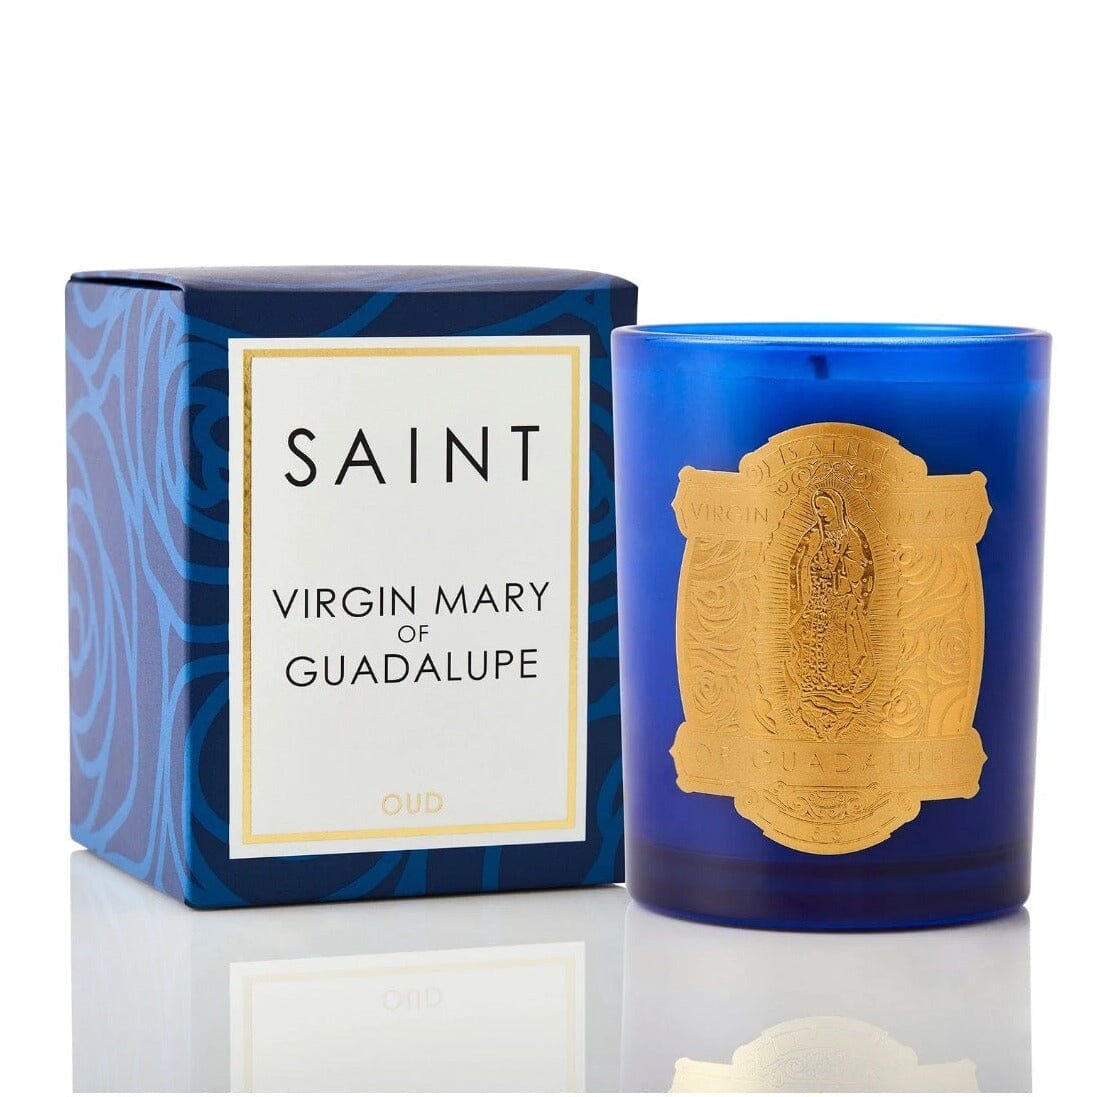 Virgin Mary of Guadalupe Special Edition Candle by SAINT CANDLES with Box